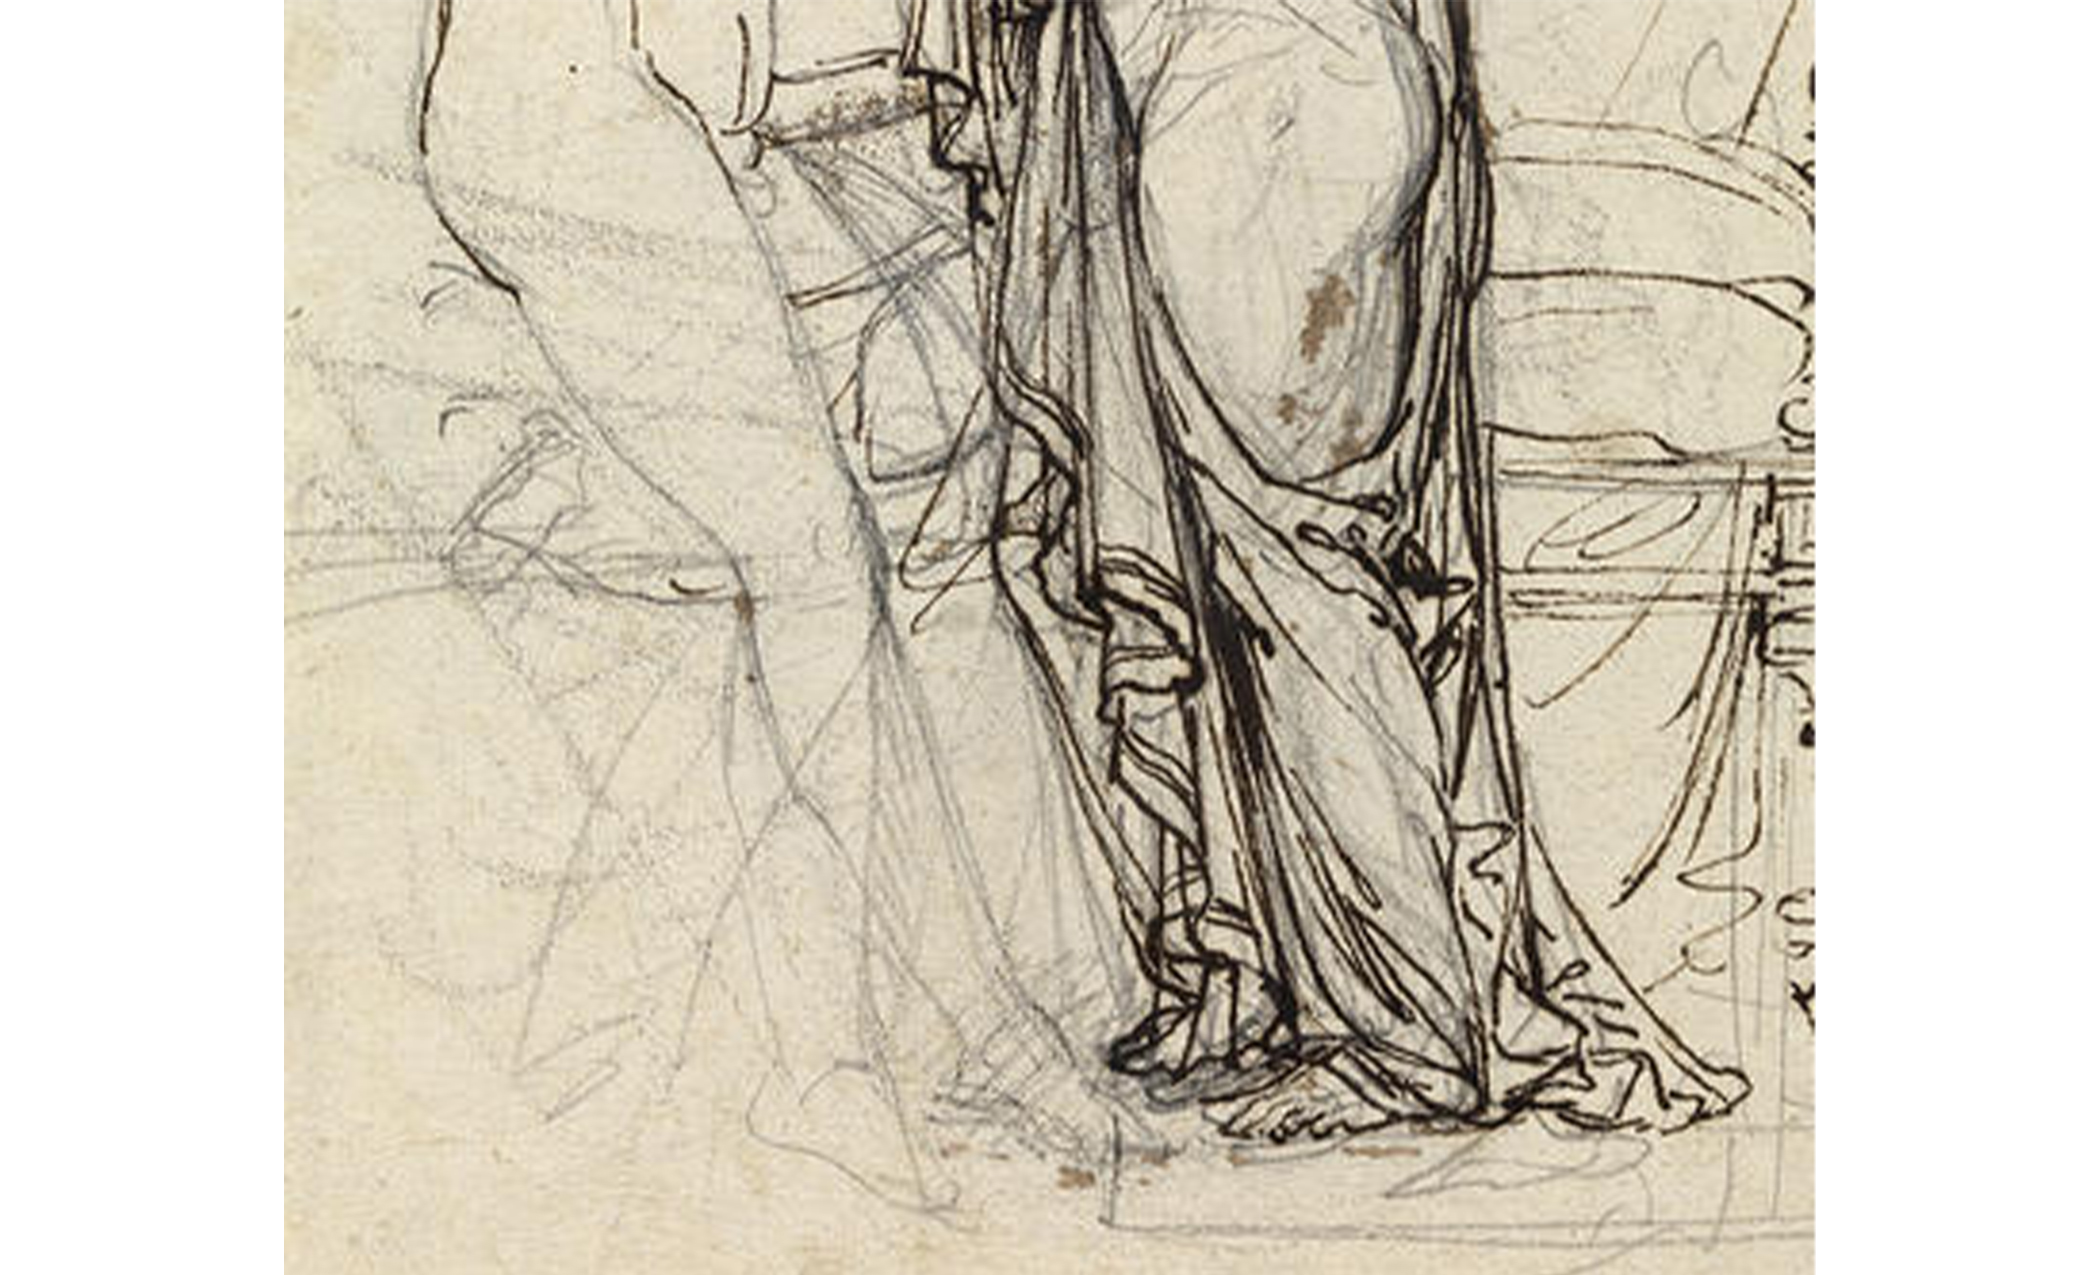 close-up of two figures' legs, one pair of which has scribbles drawn all over it